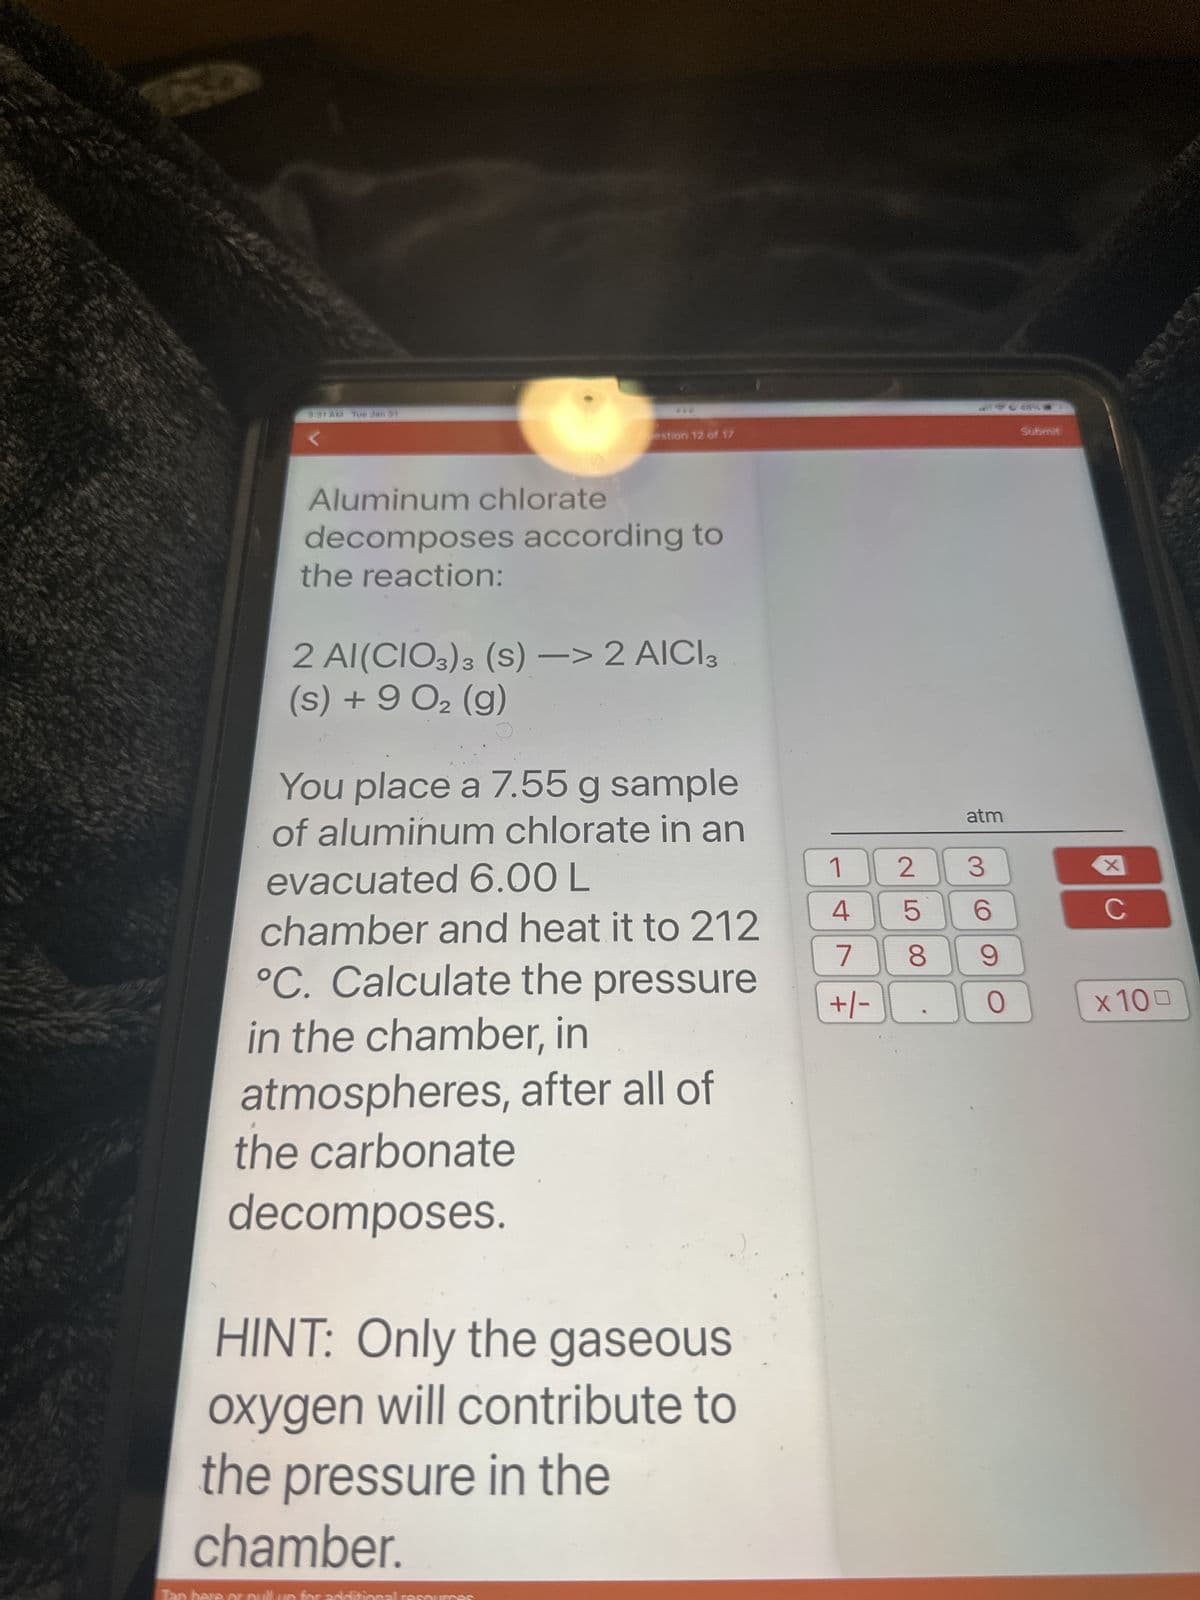 3:31 AM Tue Jan 31
question 12 of 17
Aluminum chlorate
decomposes according to
the reaction:
2 AI(CIO3) 3 (S) -> 2 AICI3
(s) + 9 0₂ (g)
You place a 7.55 g sample
of aluminum chlorate in an
evacuated 6.00 L
chamber and heat it to 212
°C. Calculate the pressure
in the chamber, in
atmospheres, after all of
the carbonate
decomposes.
HINT: Only the gaseous
oxygen will contribute to
the pressure in the
chamber.
1
4
7
+/-
2
3
5 6
8 9
0
atm
27 N
#
Submit
XC
с
x 100